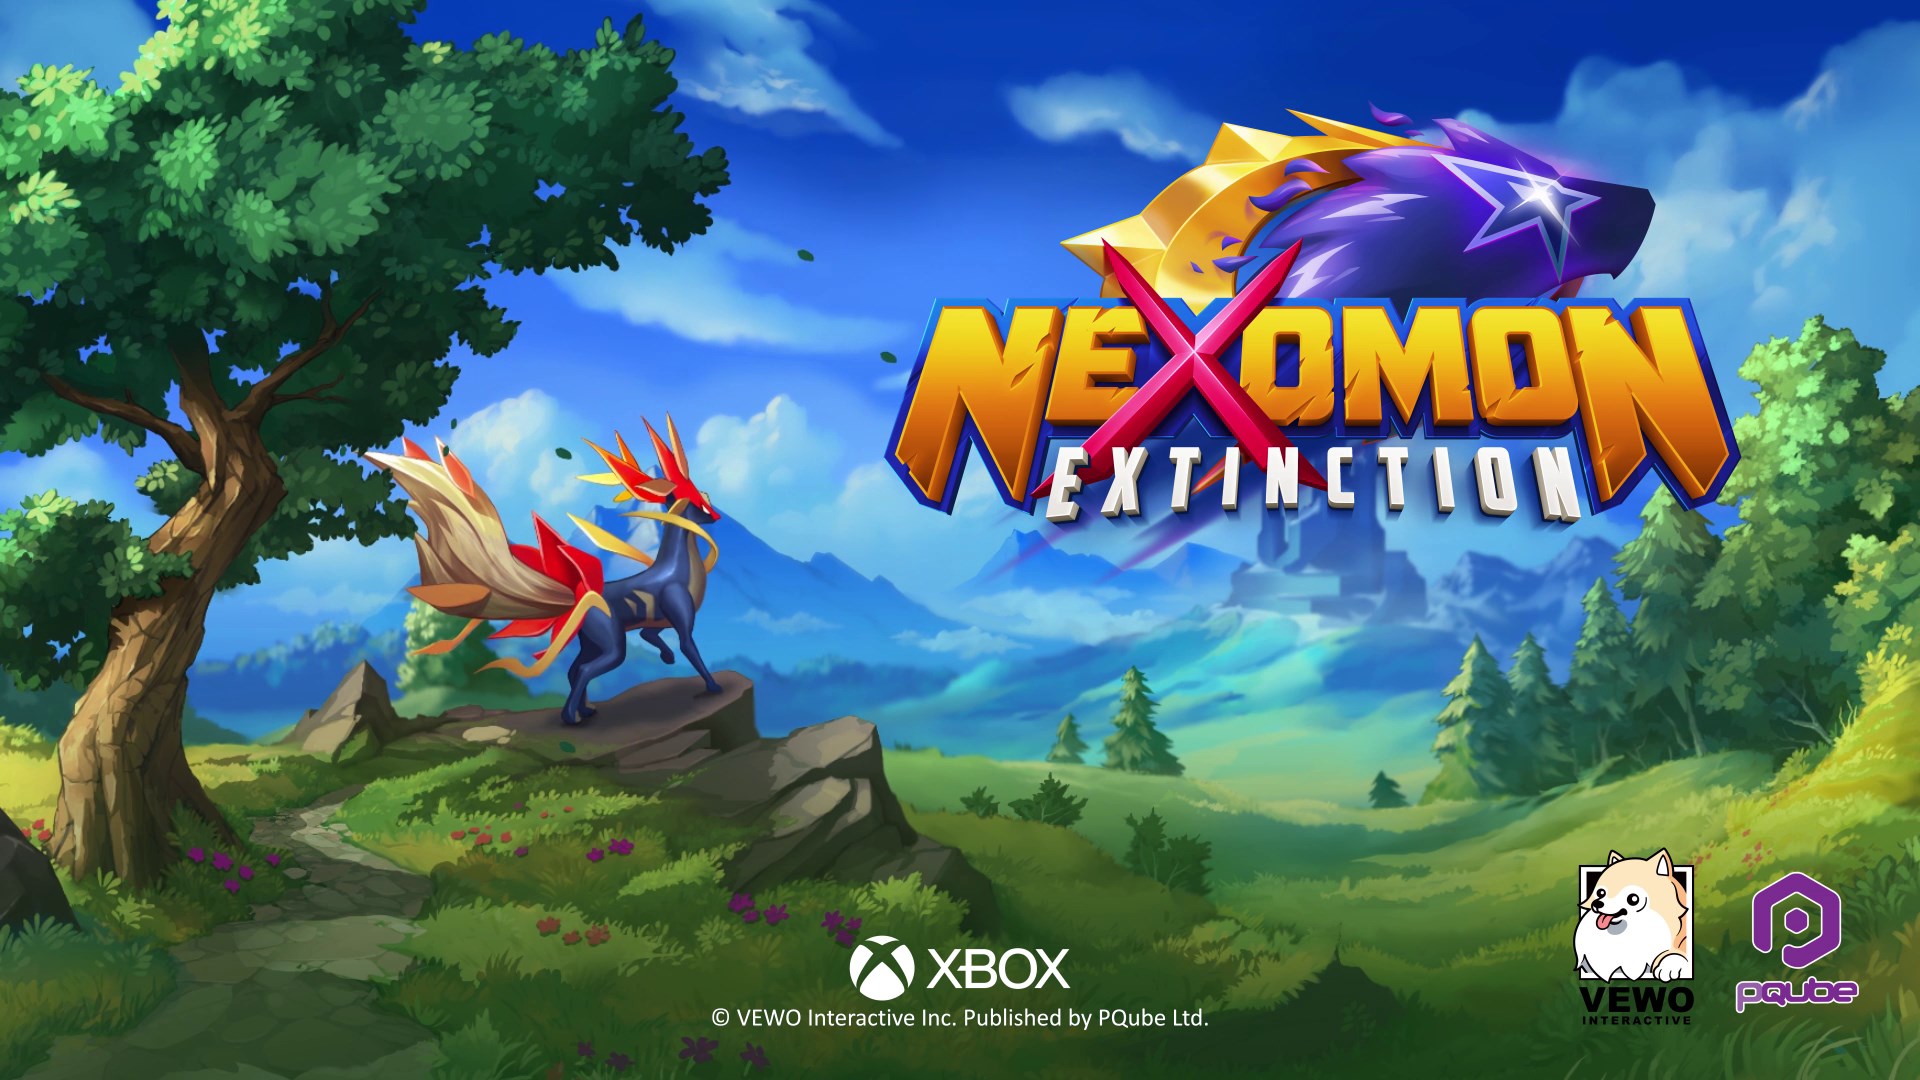 Video For Nexomon: Extinction Is Now Available For Xbox One